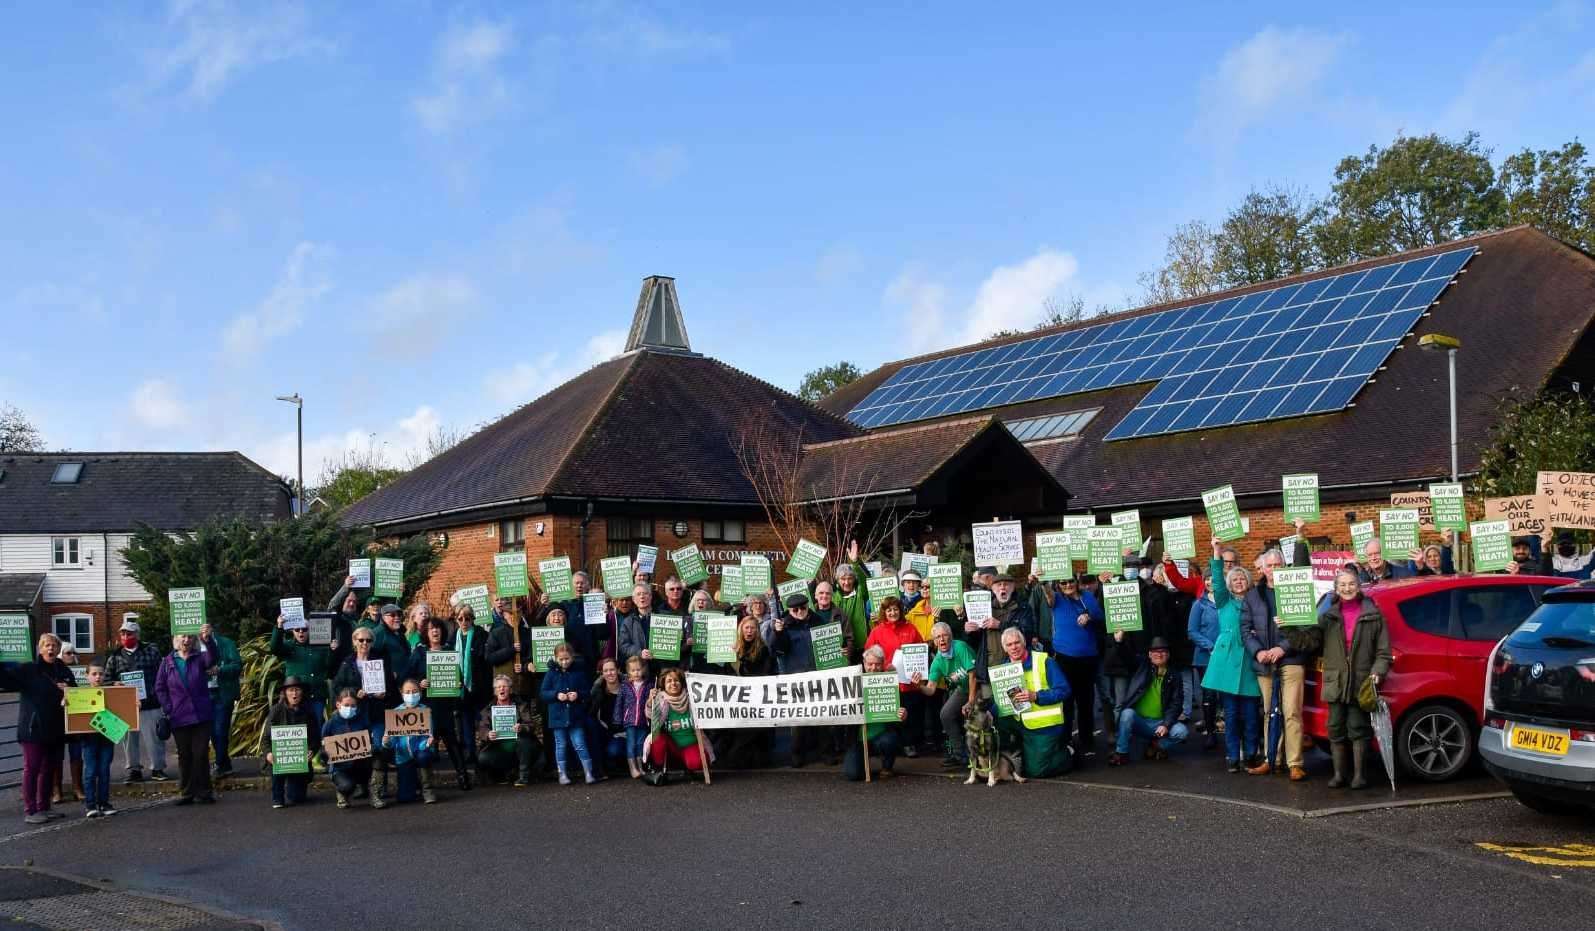 The Heathlands village proposal has sparked large local demonstrations